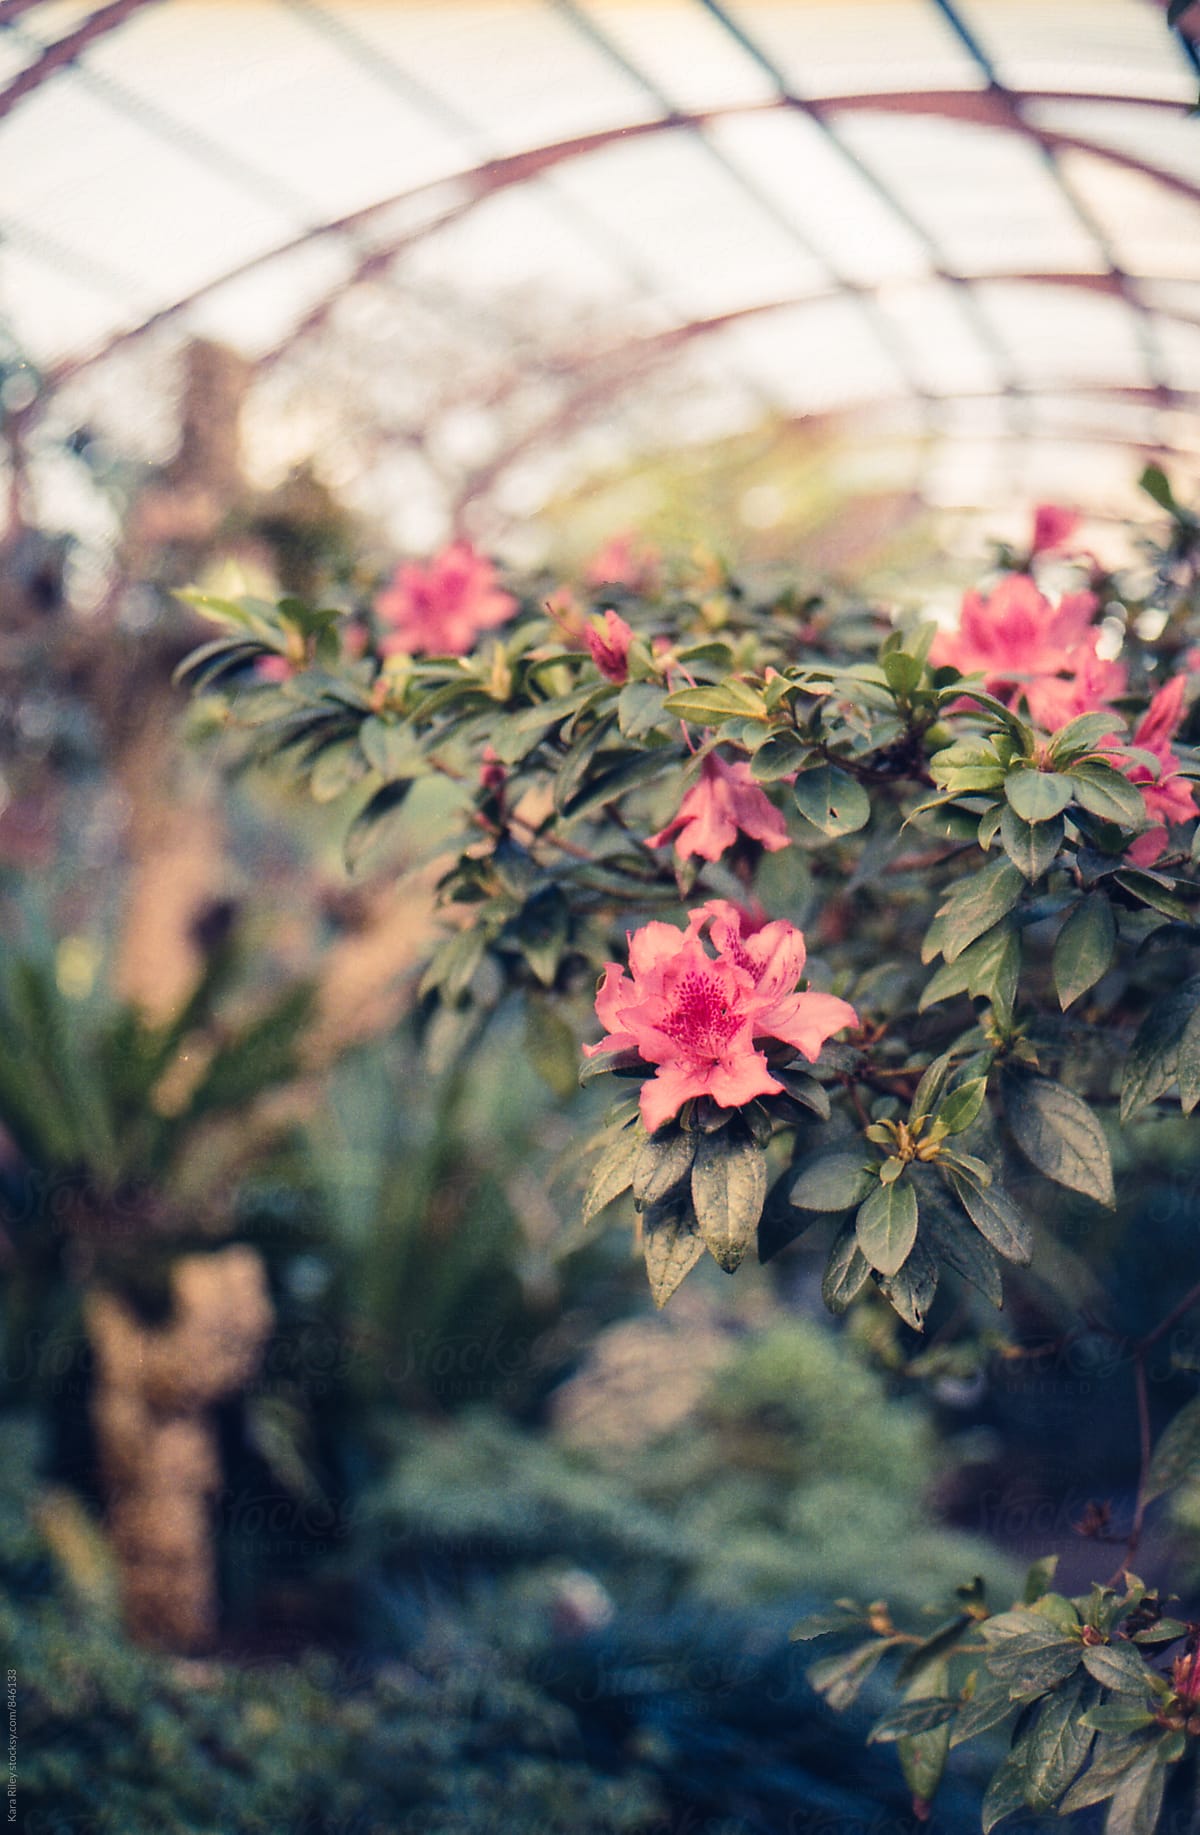 Bright pink flowers in a conservatory